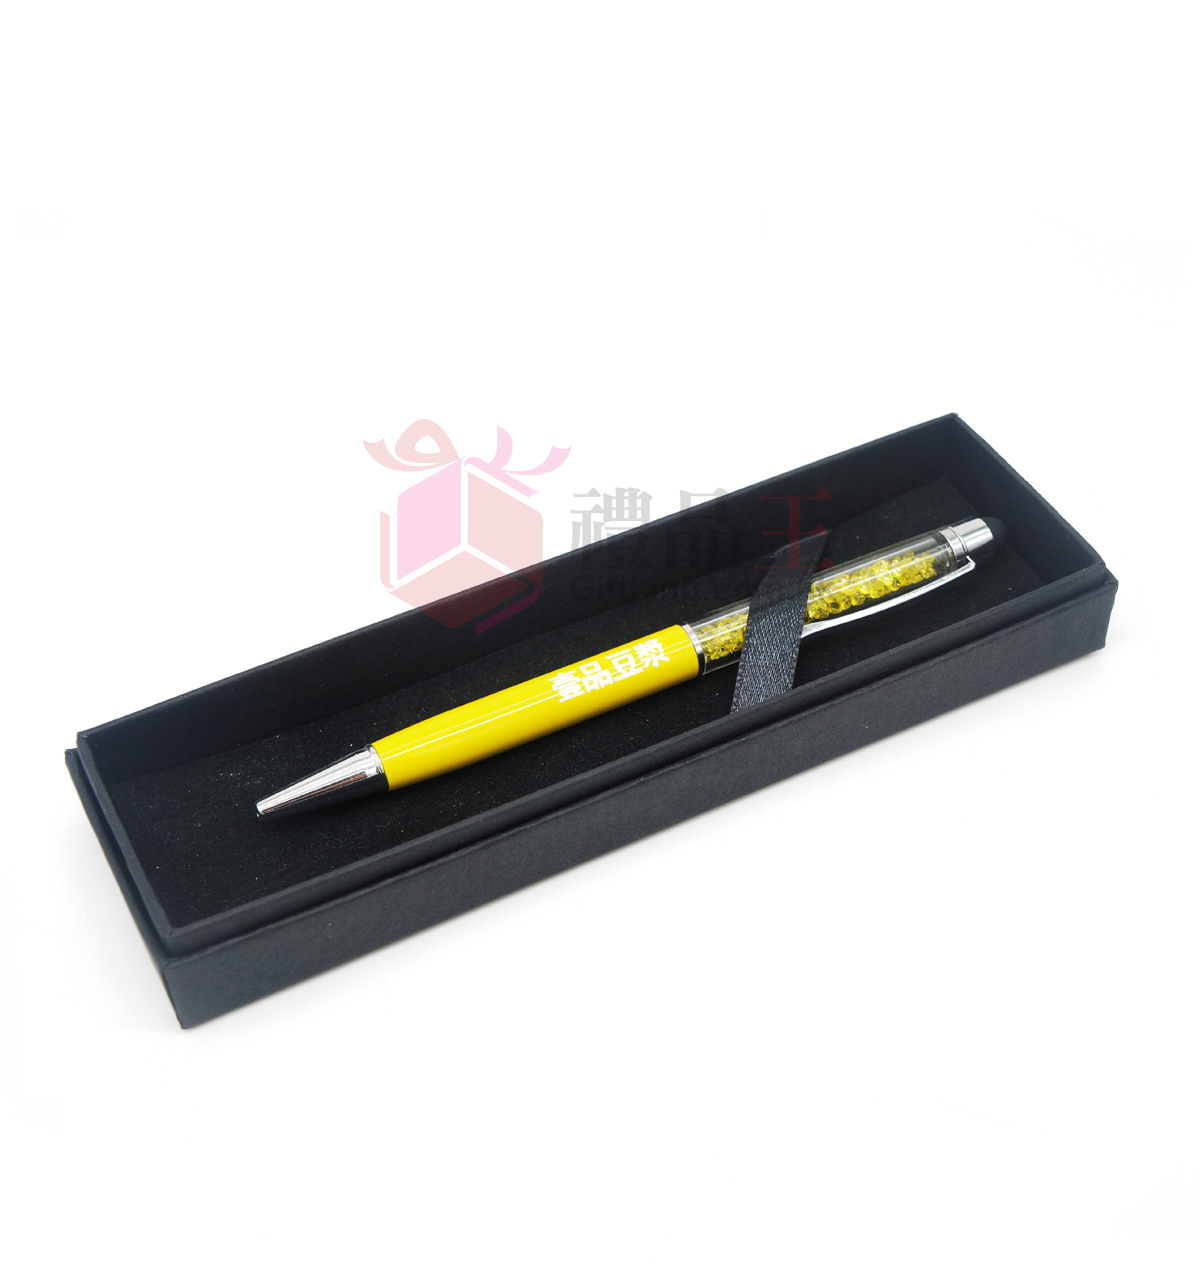 Topsoya touch ball pen (Mobile phone gift)